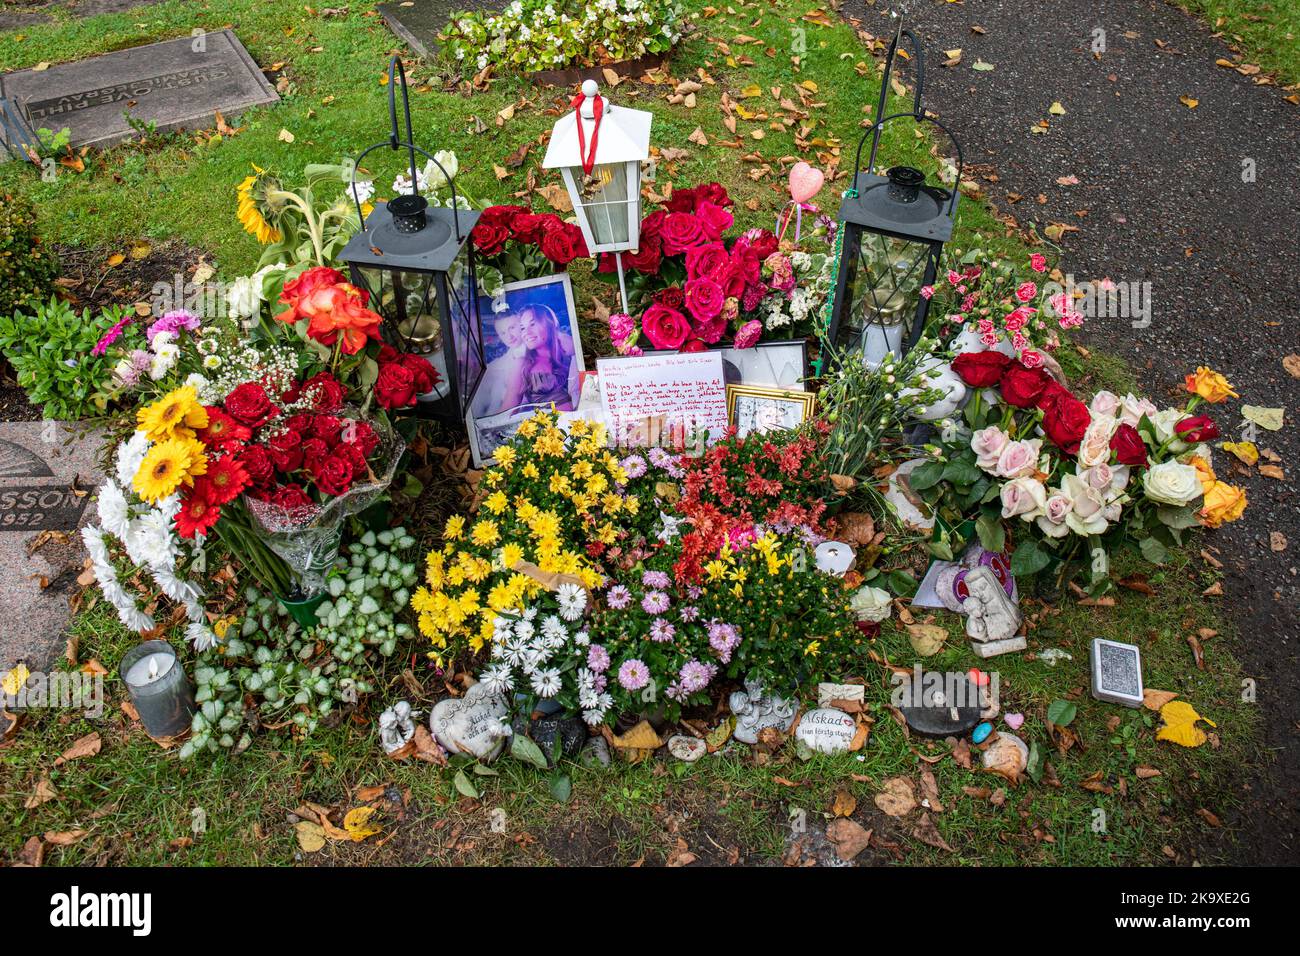 Flowers, lanterns, letters and pictures on the grave of Swedish rapper Einár in Katarina kyrkogård cemetery in Stockholm, Sweden Stock Photo